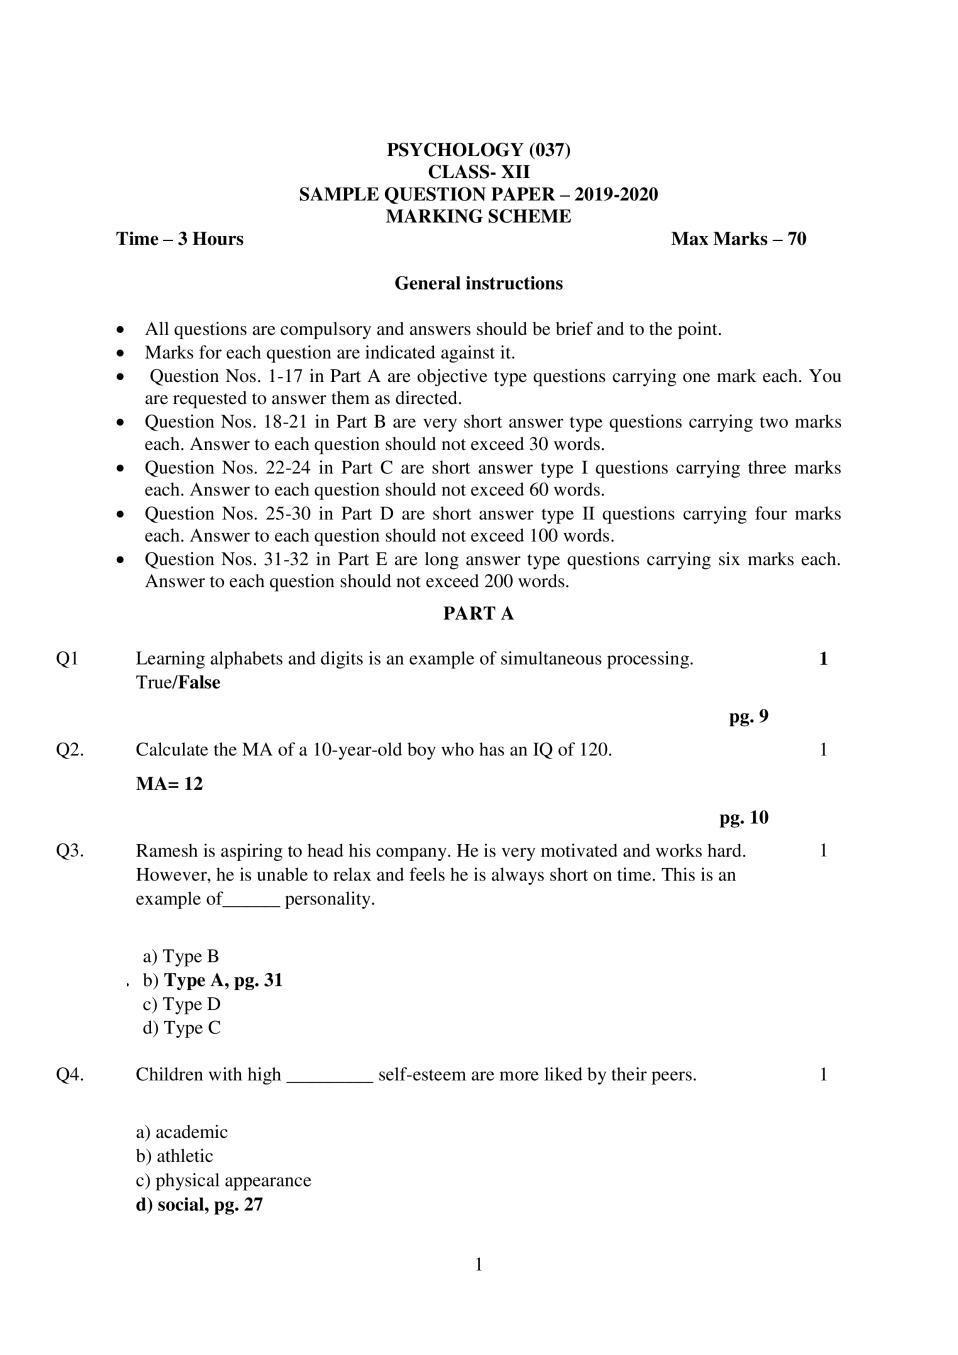 CBSE Class 12 Marking Scheme 2020 for Psychology - Page 1